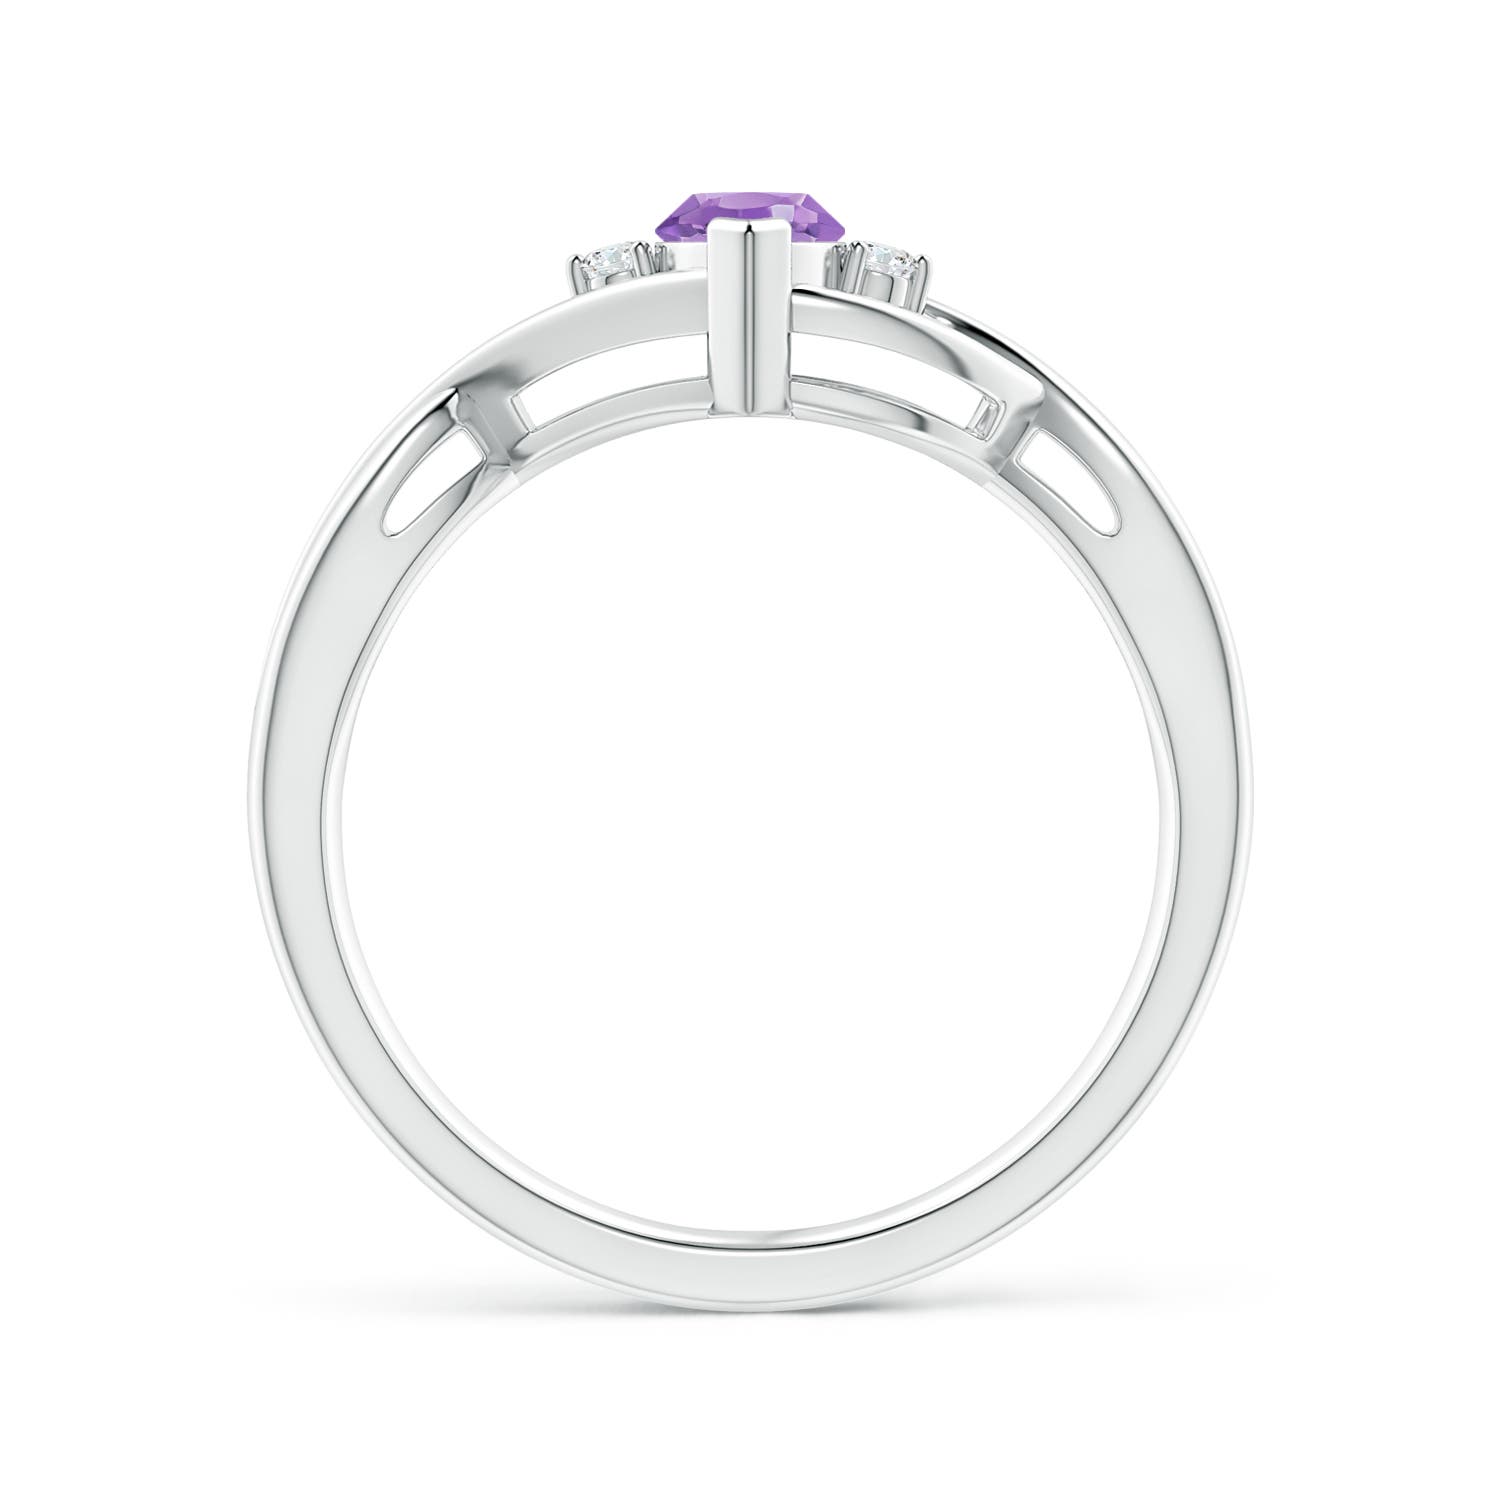 A - Amethyst / 0.53 CT / 14 KT White Gold